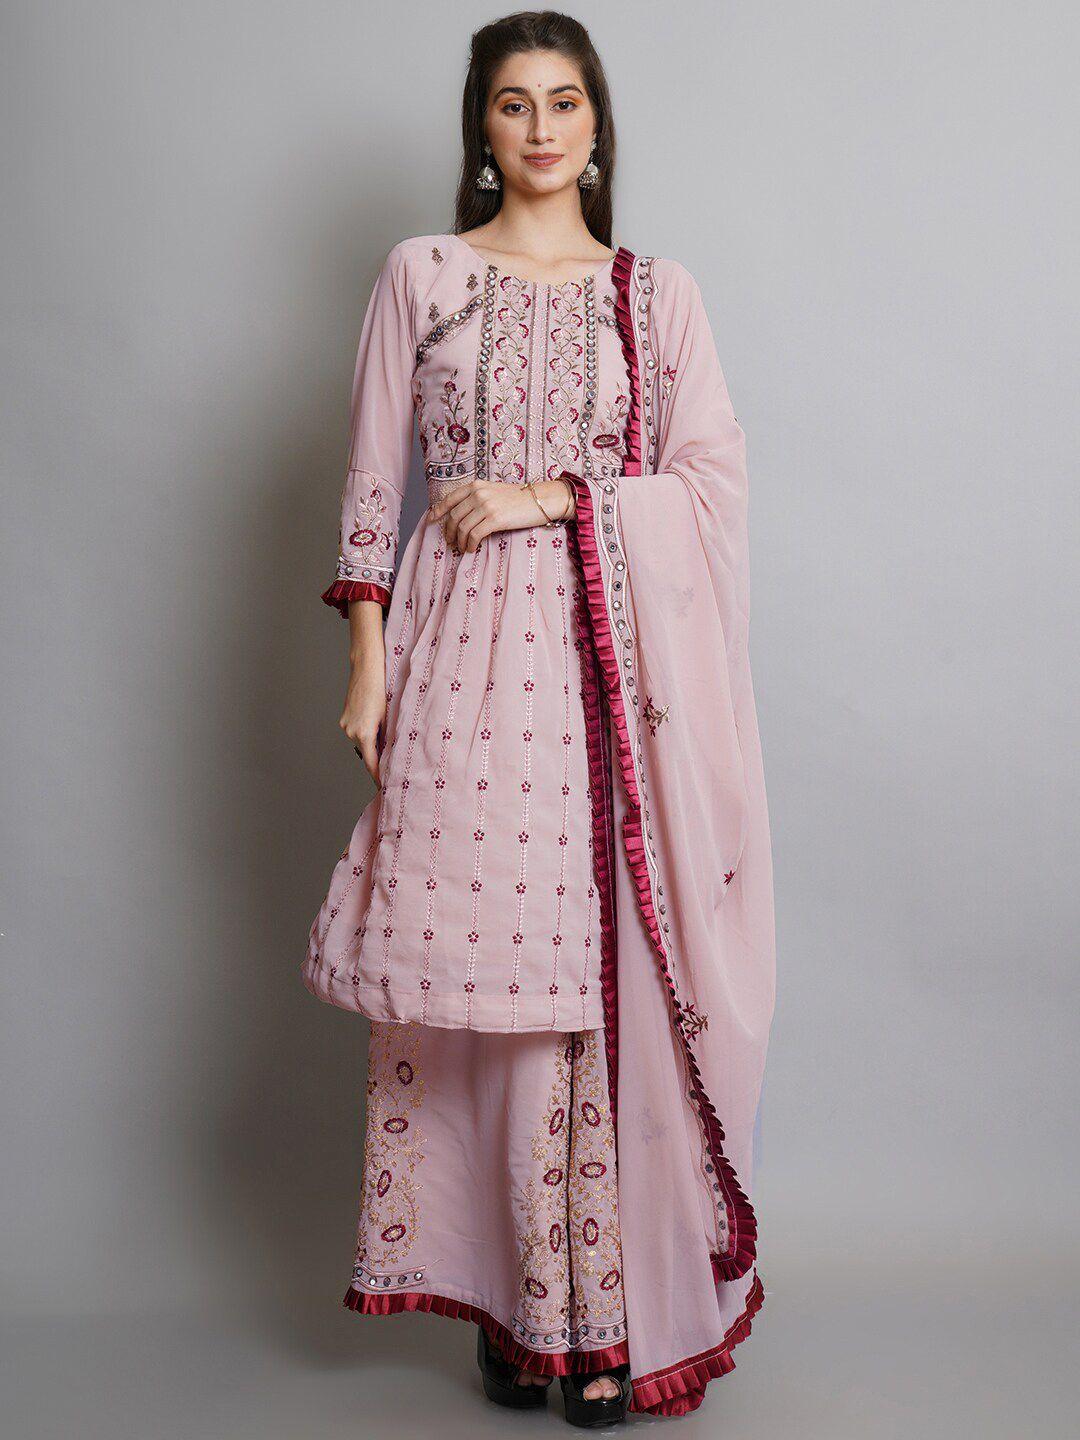 Stylee LIFESTYLE Women Pink & Brown Embroidered Semi-Stitched Dress Material